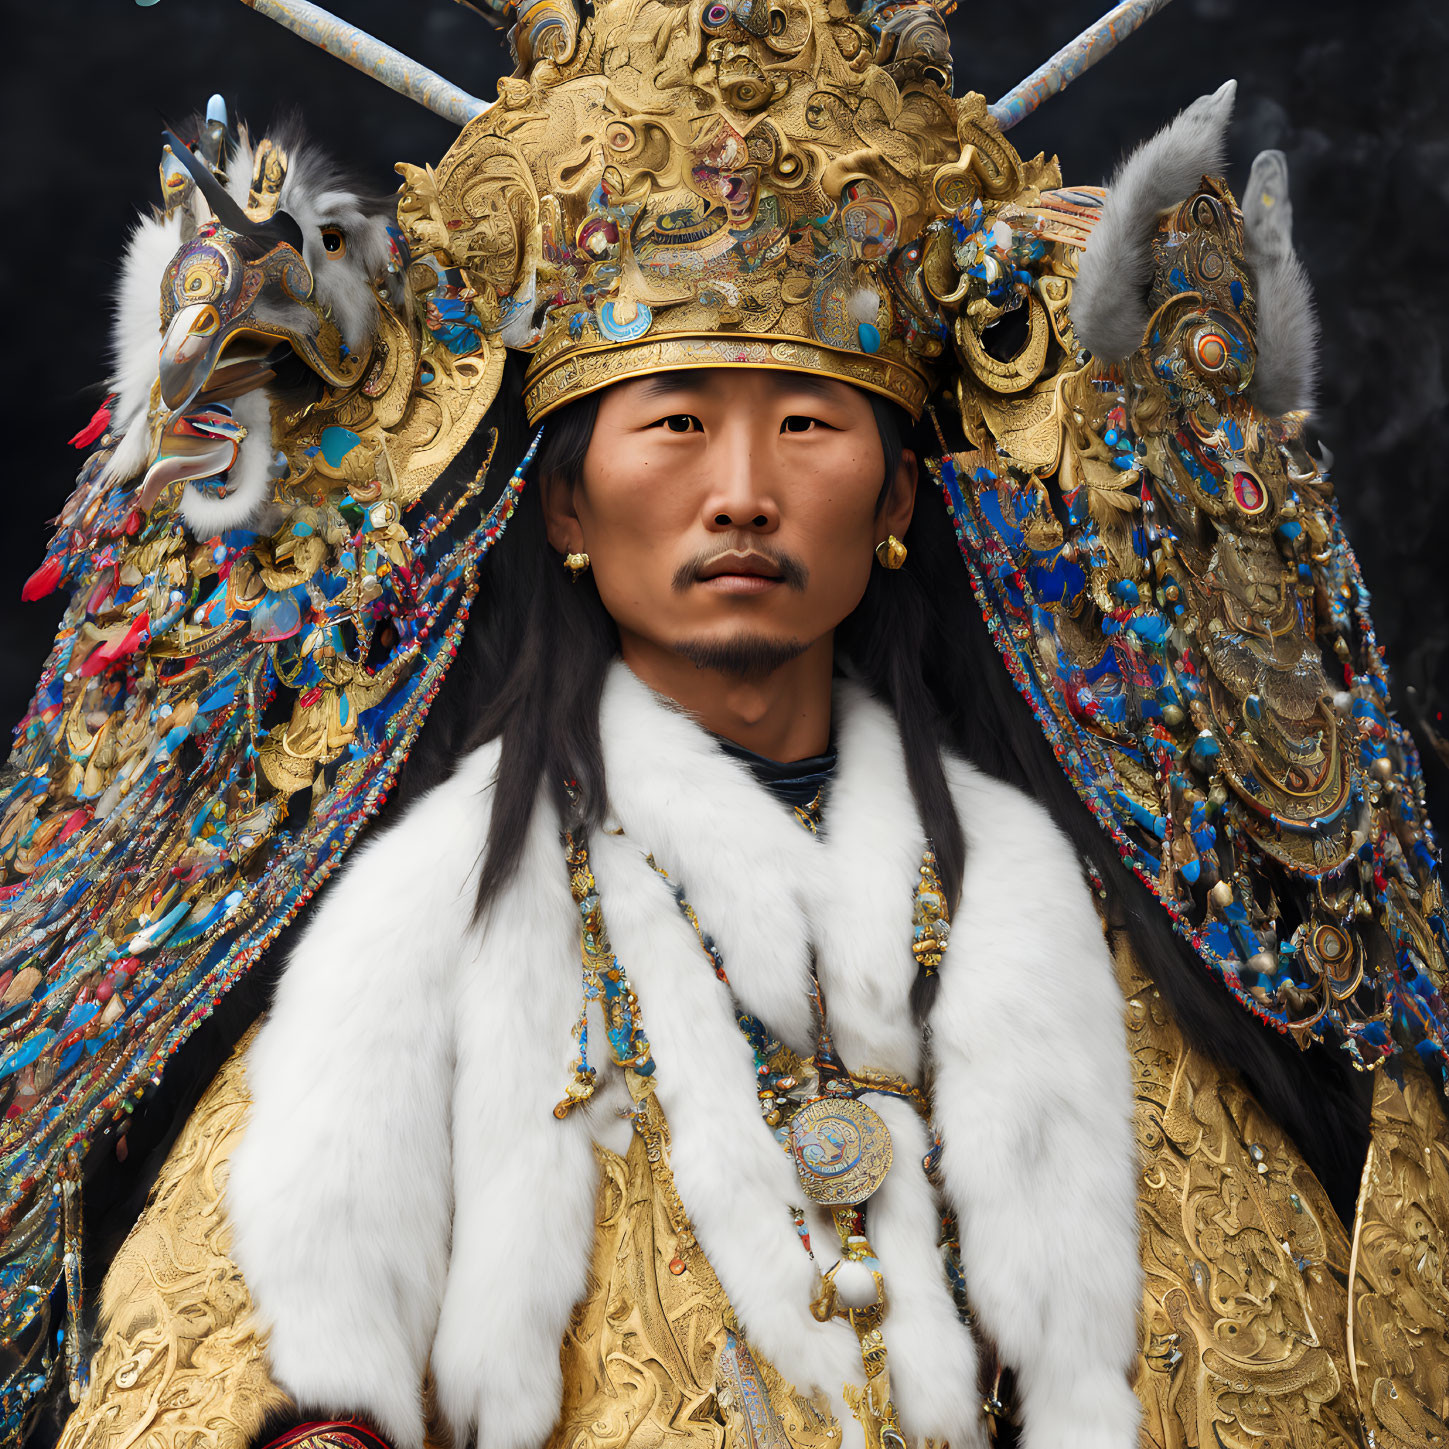 Elaborate Traditional Mongolian Armor with Gold Patterns and Feathers